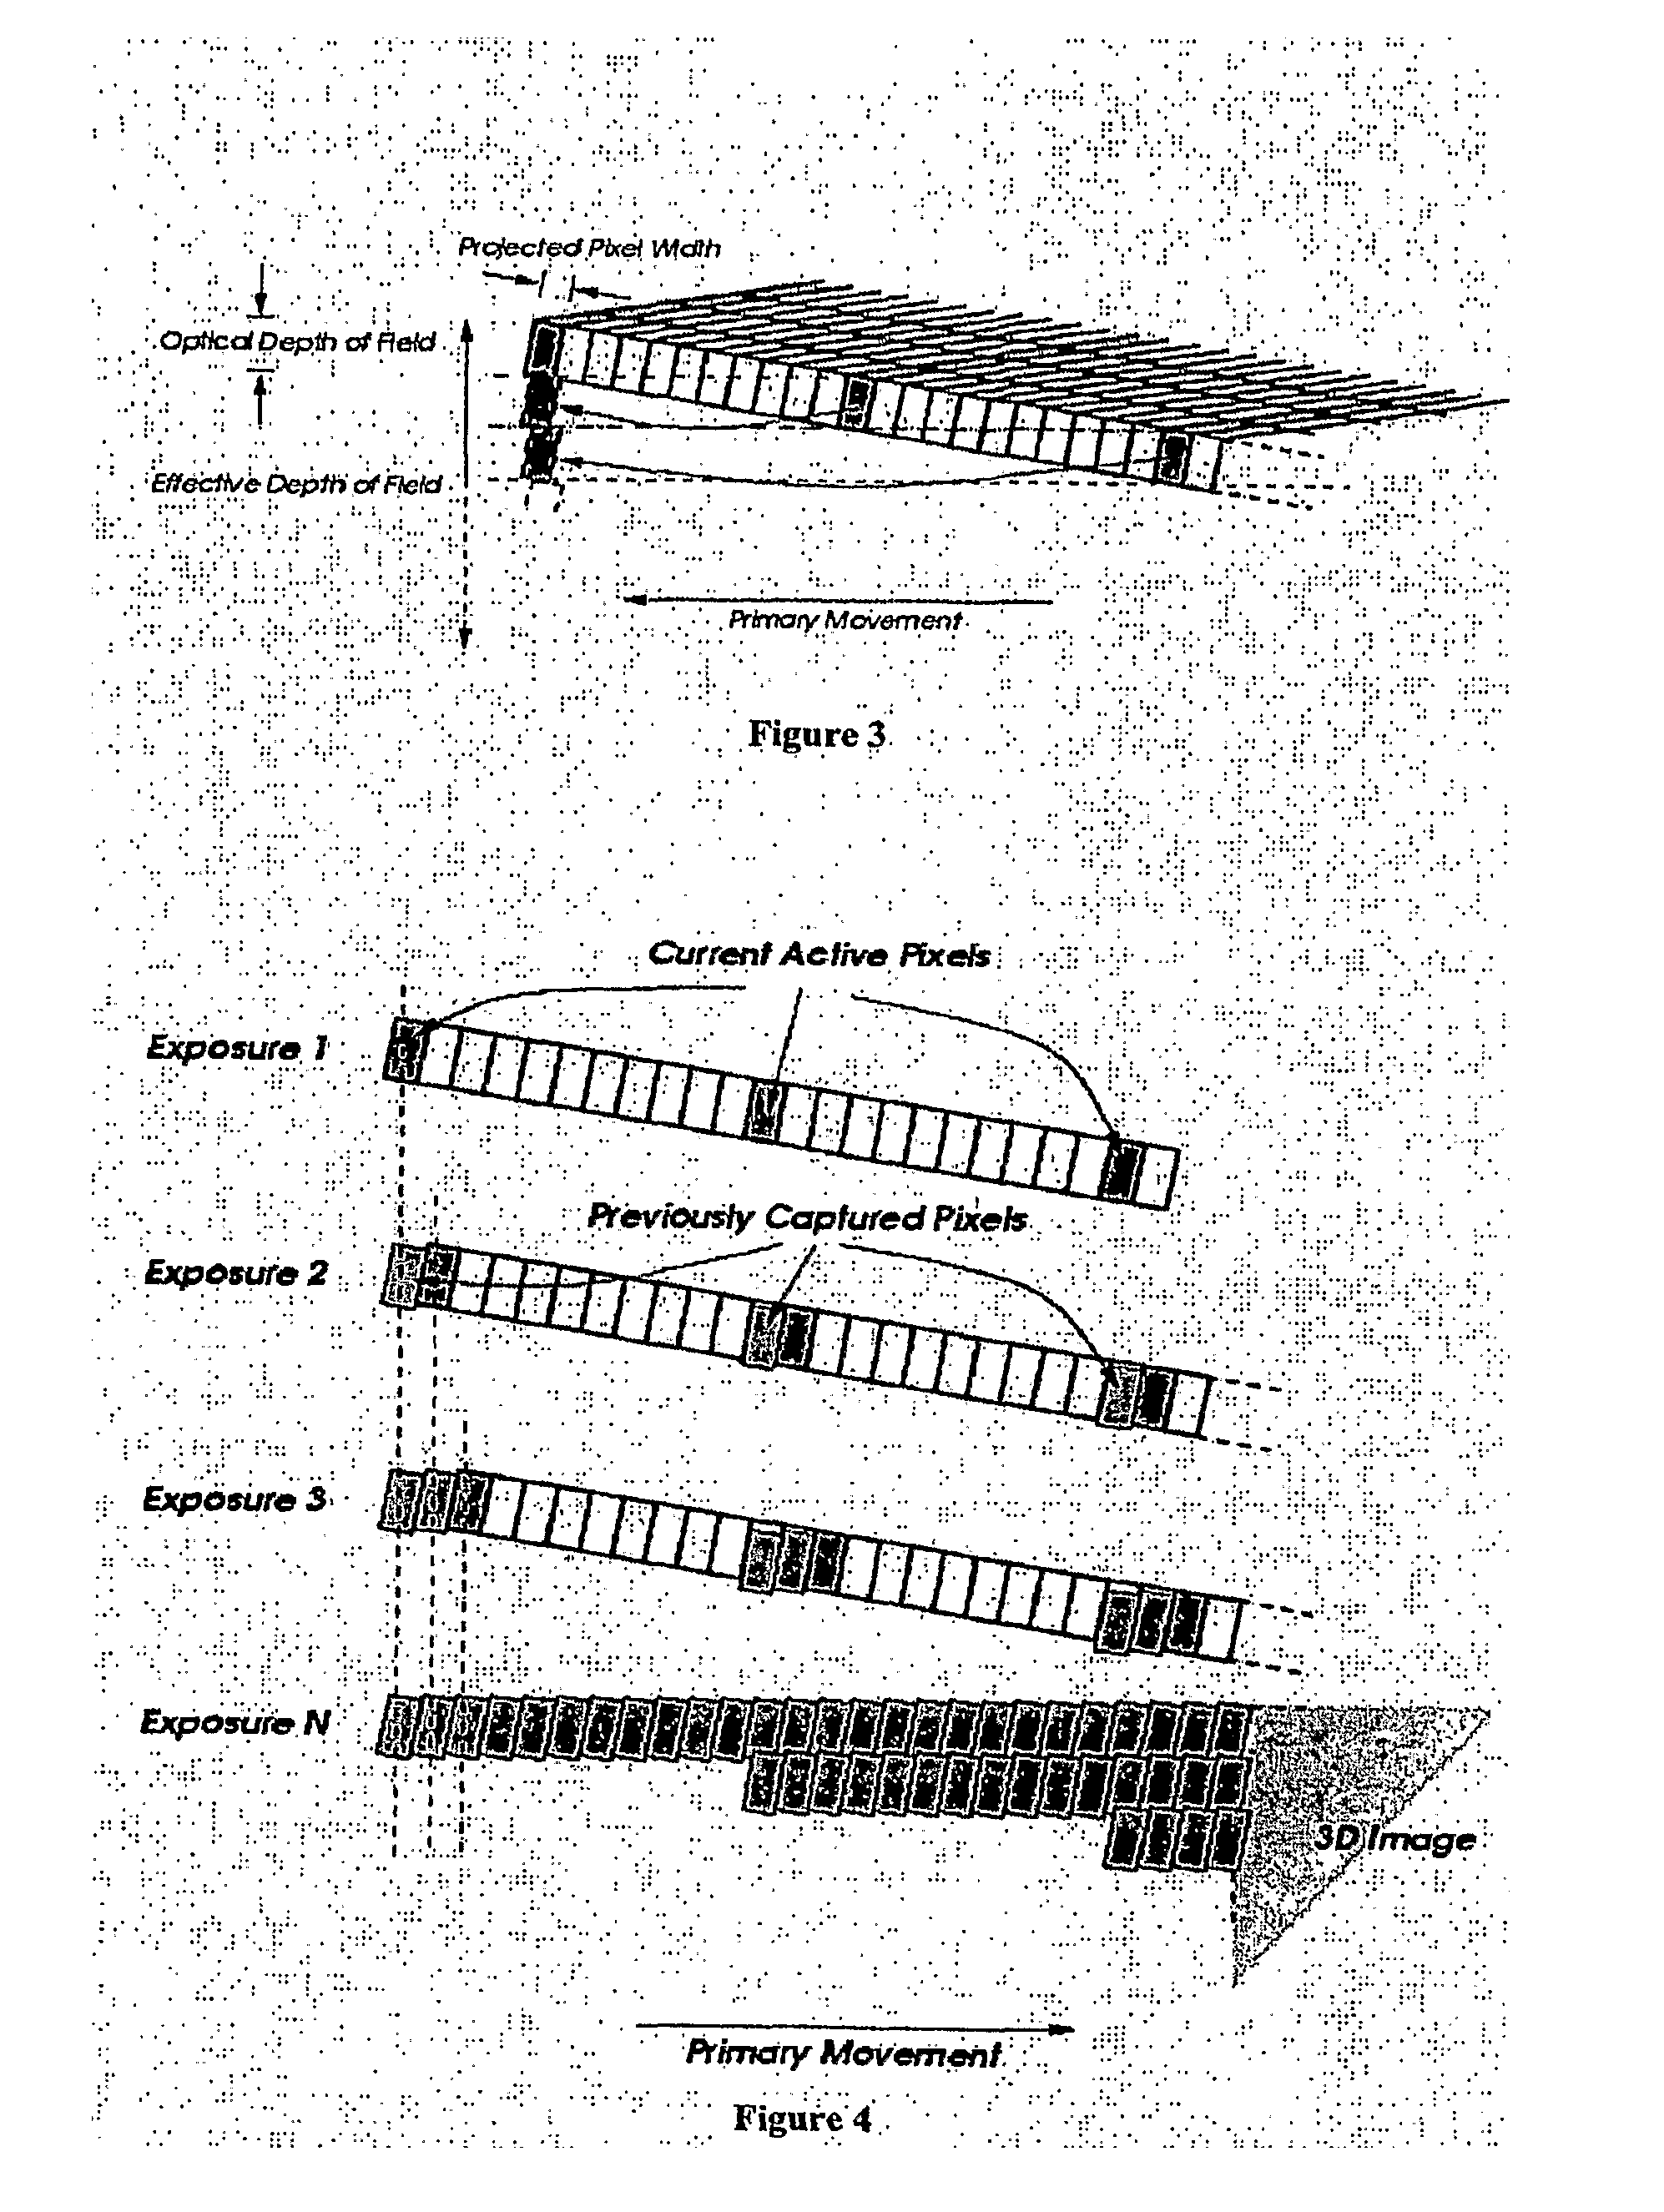 Method and apparatus and computer program product for collecting digital image data from microscope media-based specimens